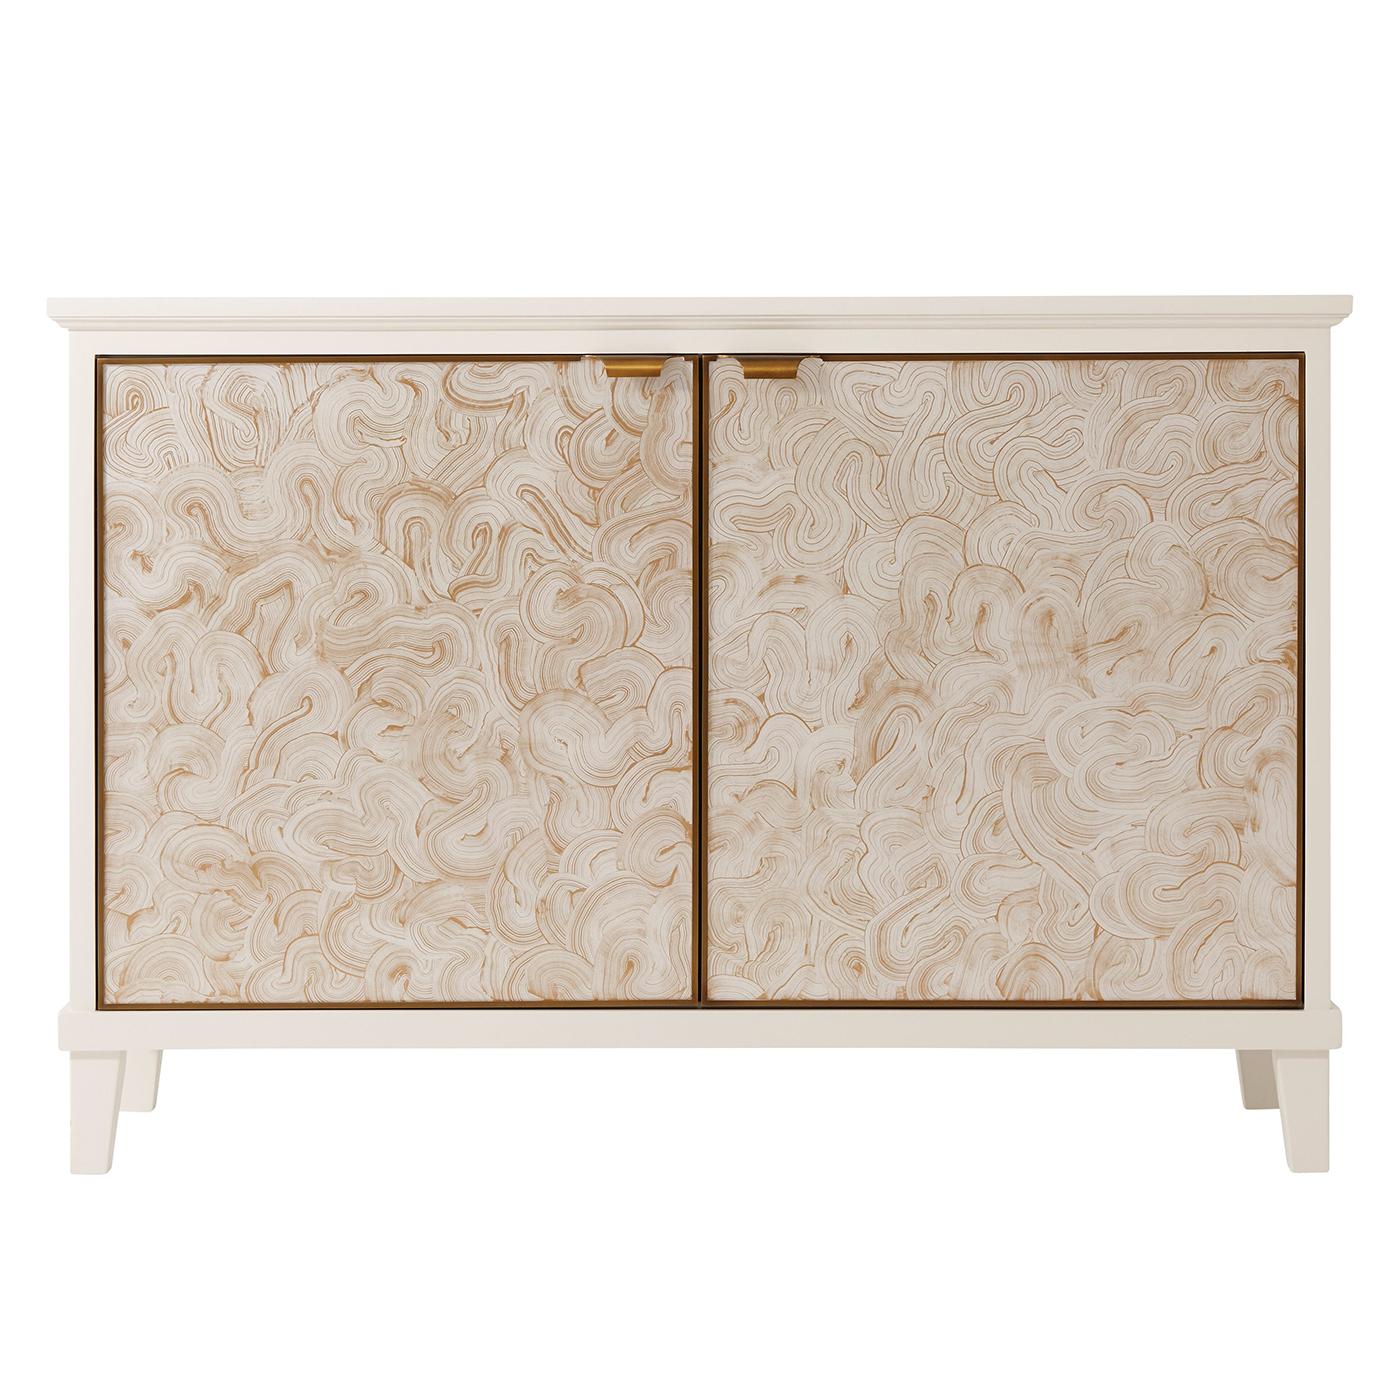 A modern pear lacquered two-door cabinet with a rectangular top above two brass finished frame doors with glass reverse painted faux marbled panels, the interior with two drawers and adjustable shelve all raised on tapered legs.

Dimensions: 50